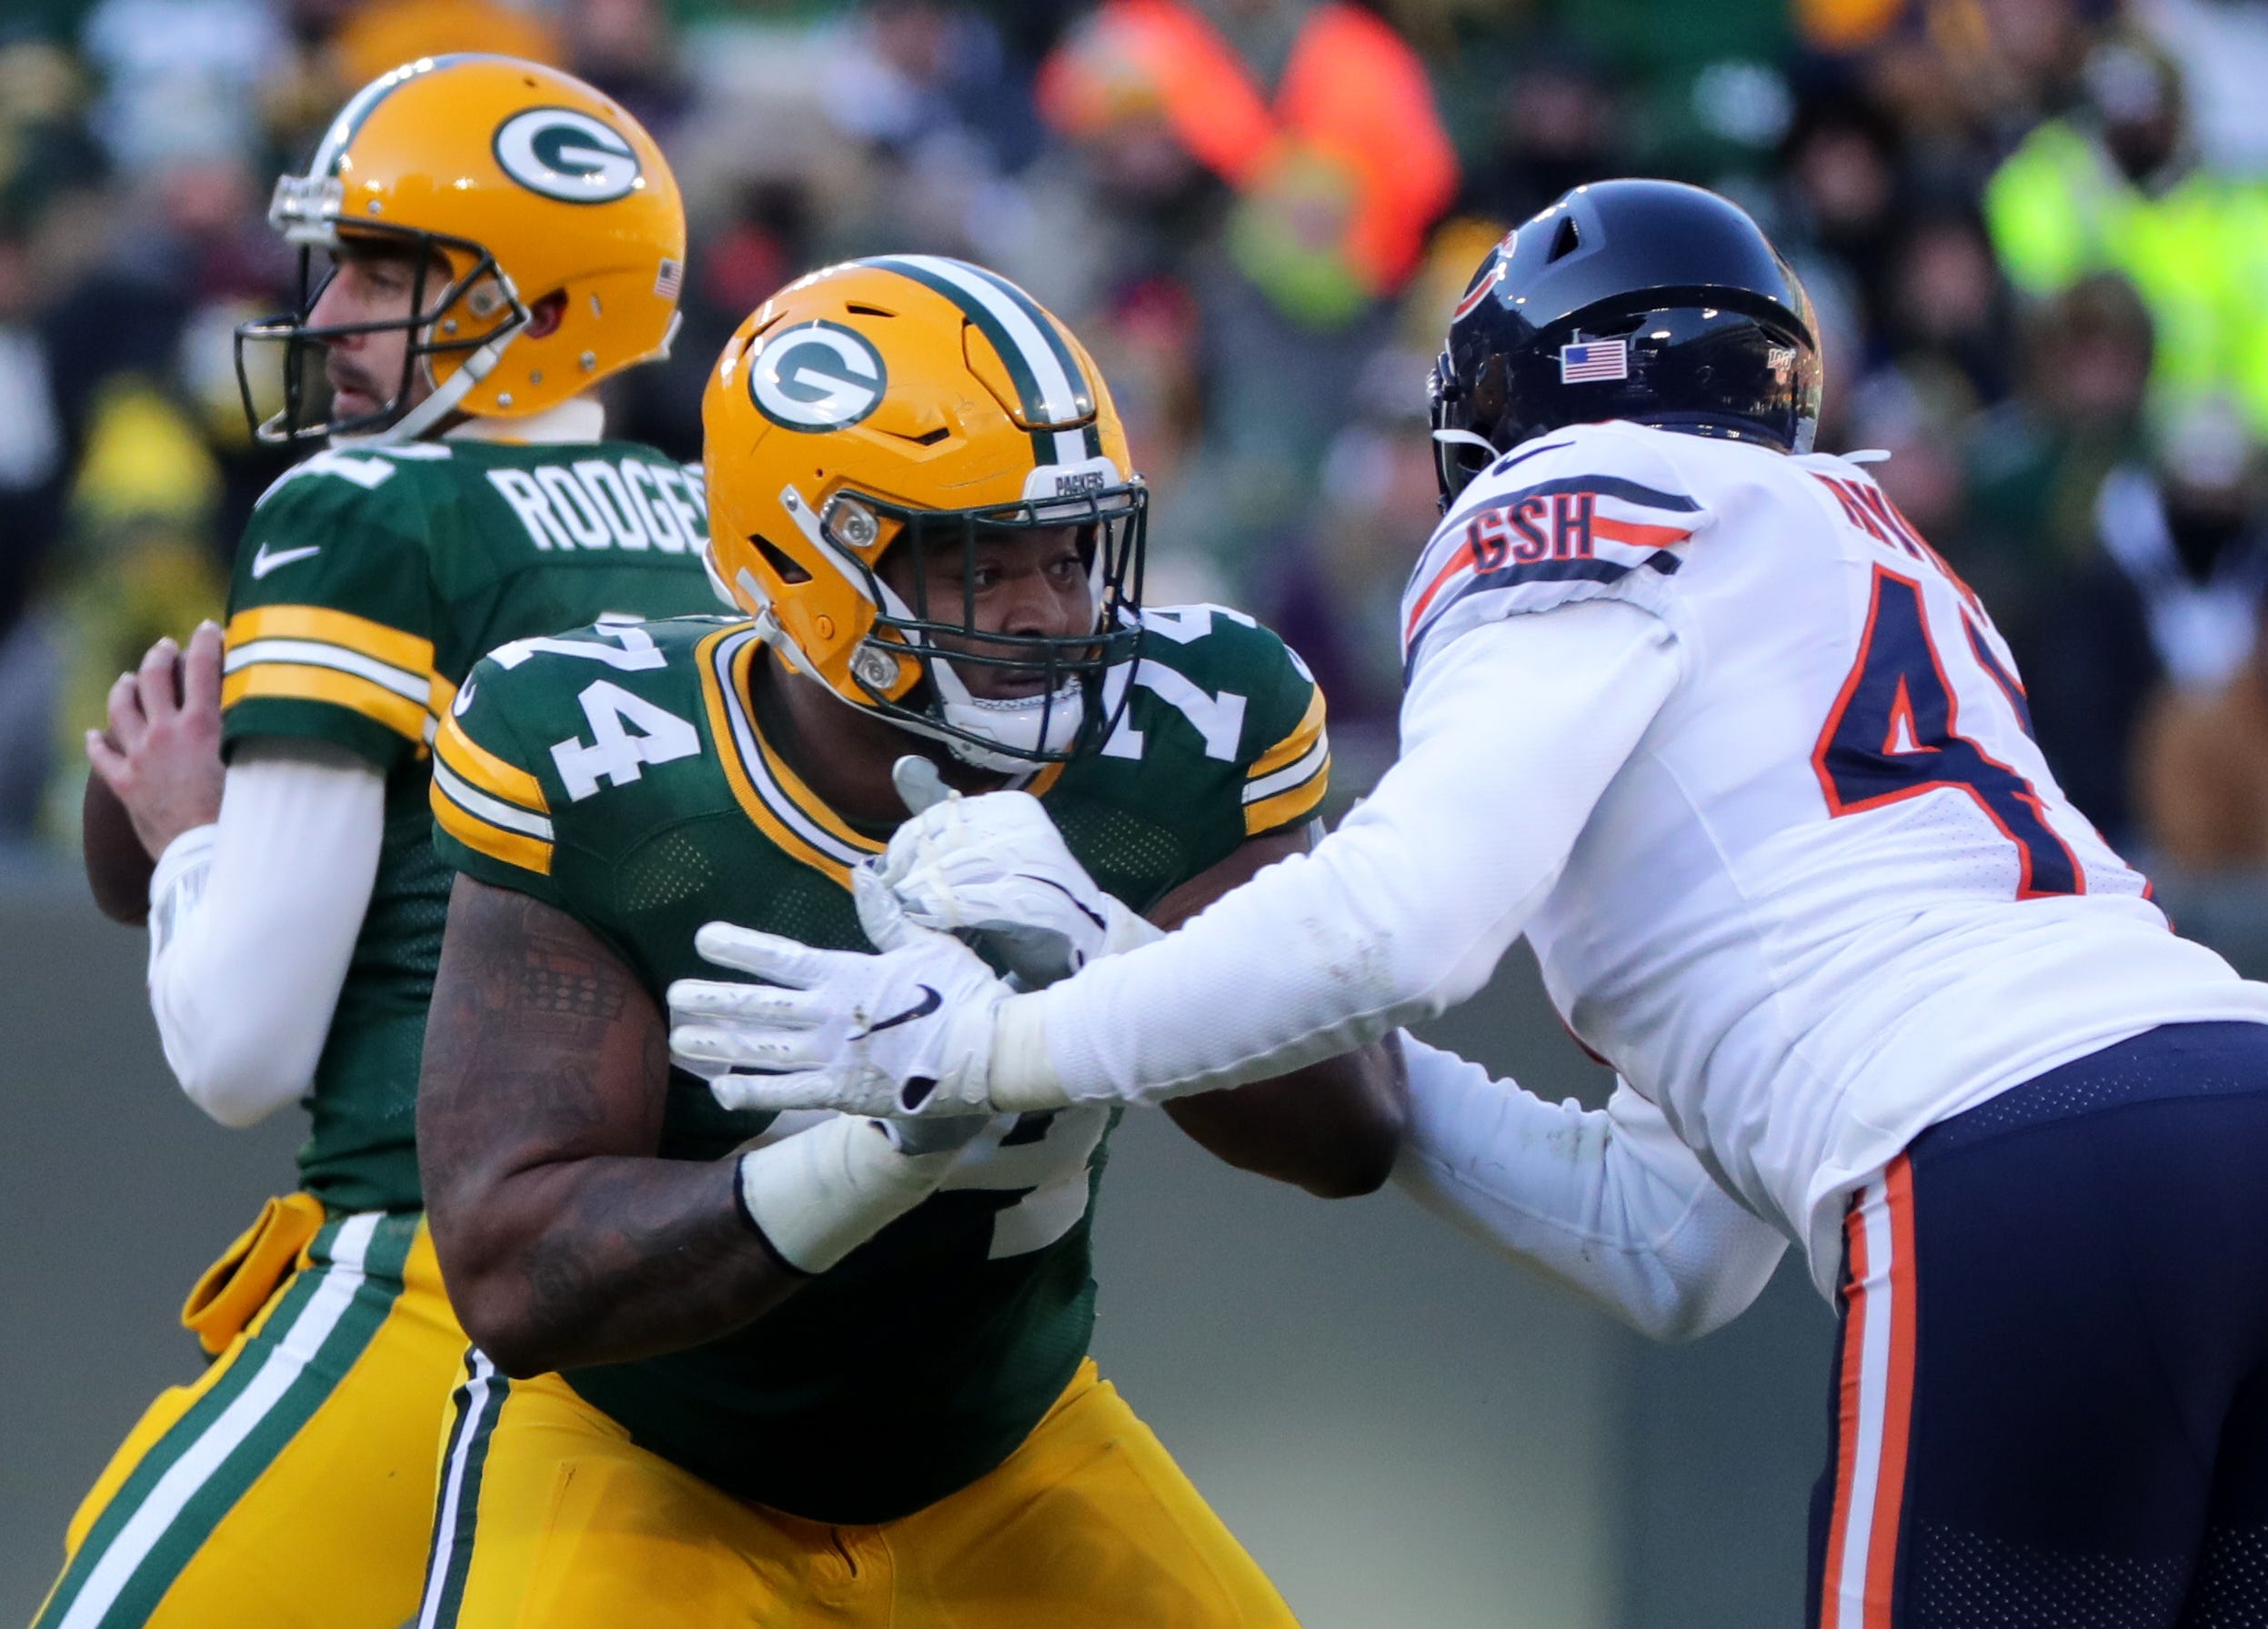 Green Bay Packers offensive guard Elgton Jenkins (74) provides pass protection while blocking Chicago Bears linebacker Isaiah Irving (47) during the third quarter of their game Sunday, December 15, 2019 at Lambeau Field in Green Bay, Wis. The Green Bay Packers beat the Chicago Bears 21-13.